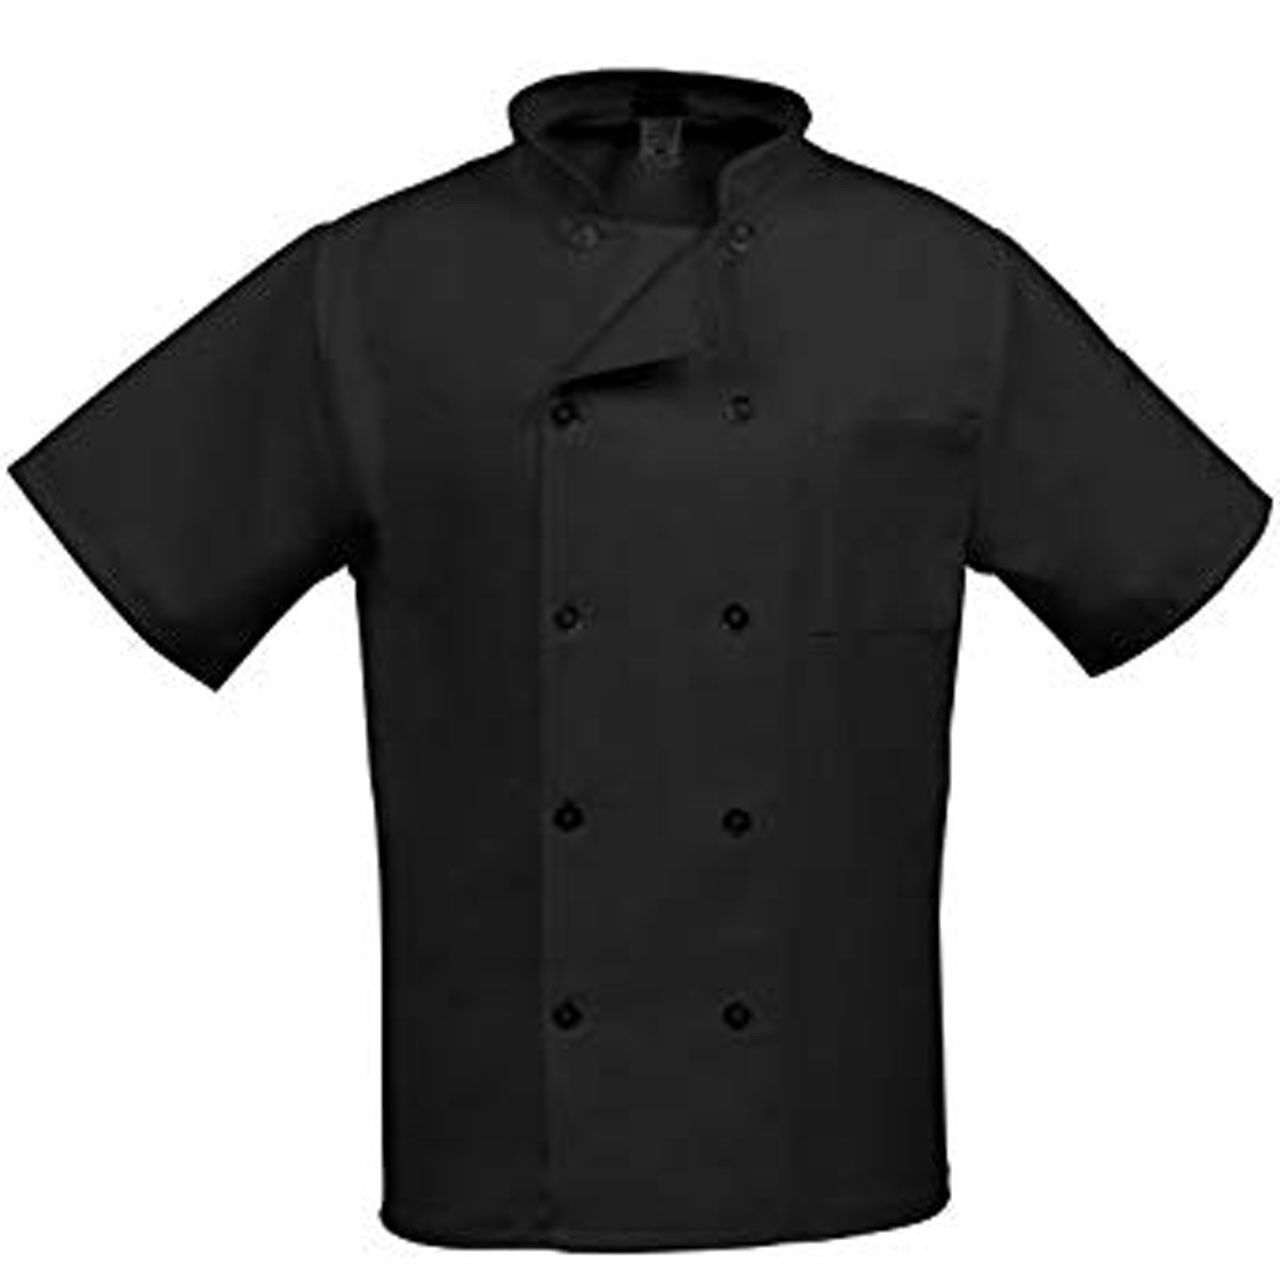 What sizes are available for this chef coat?